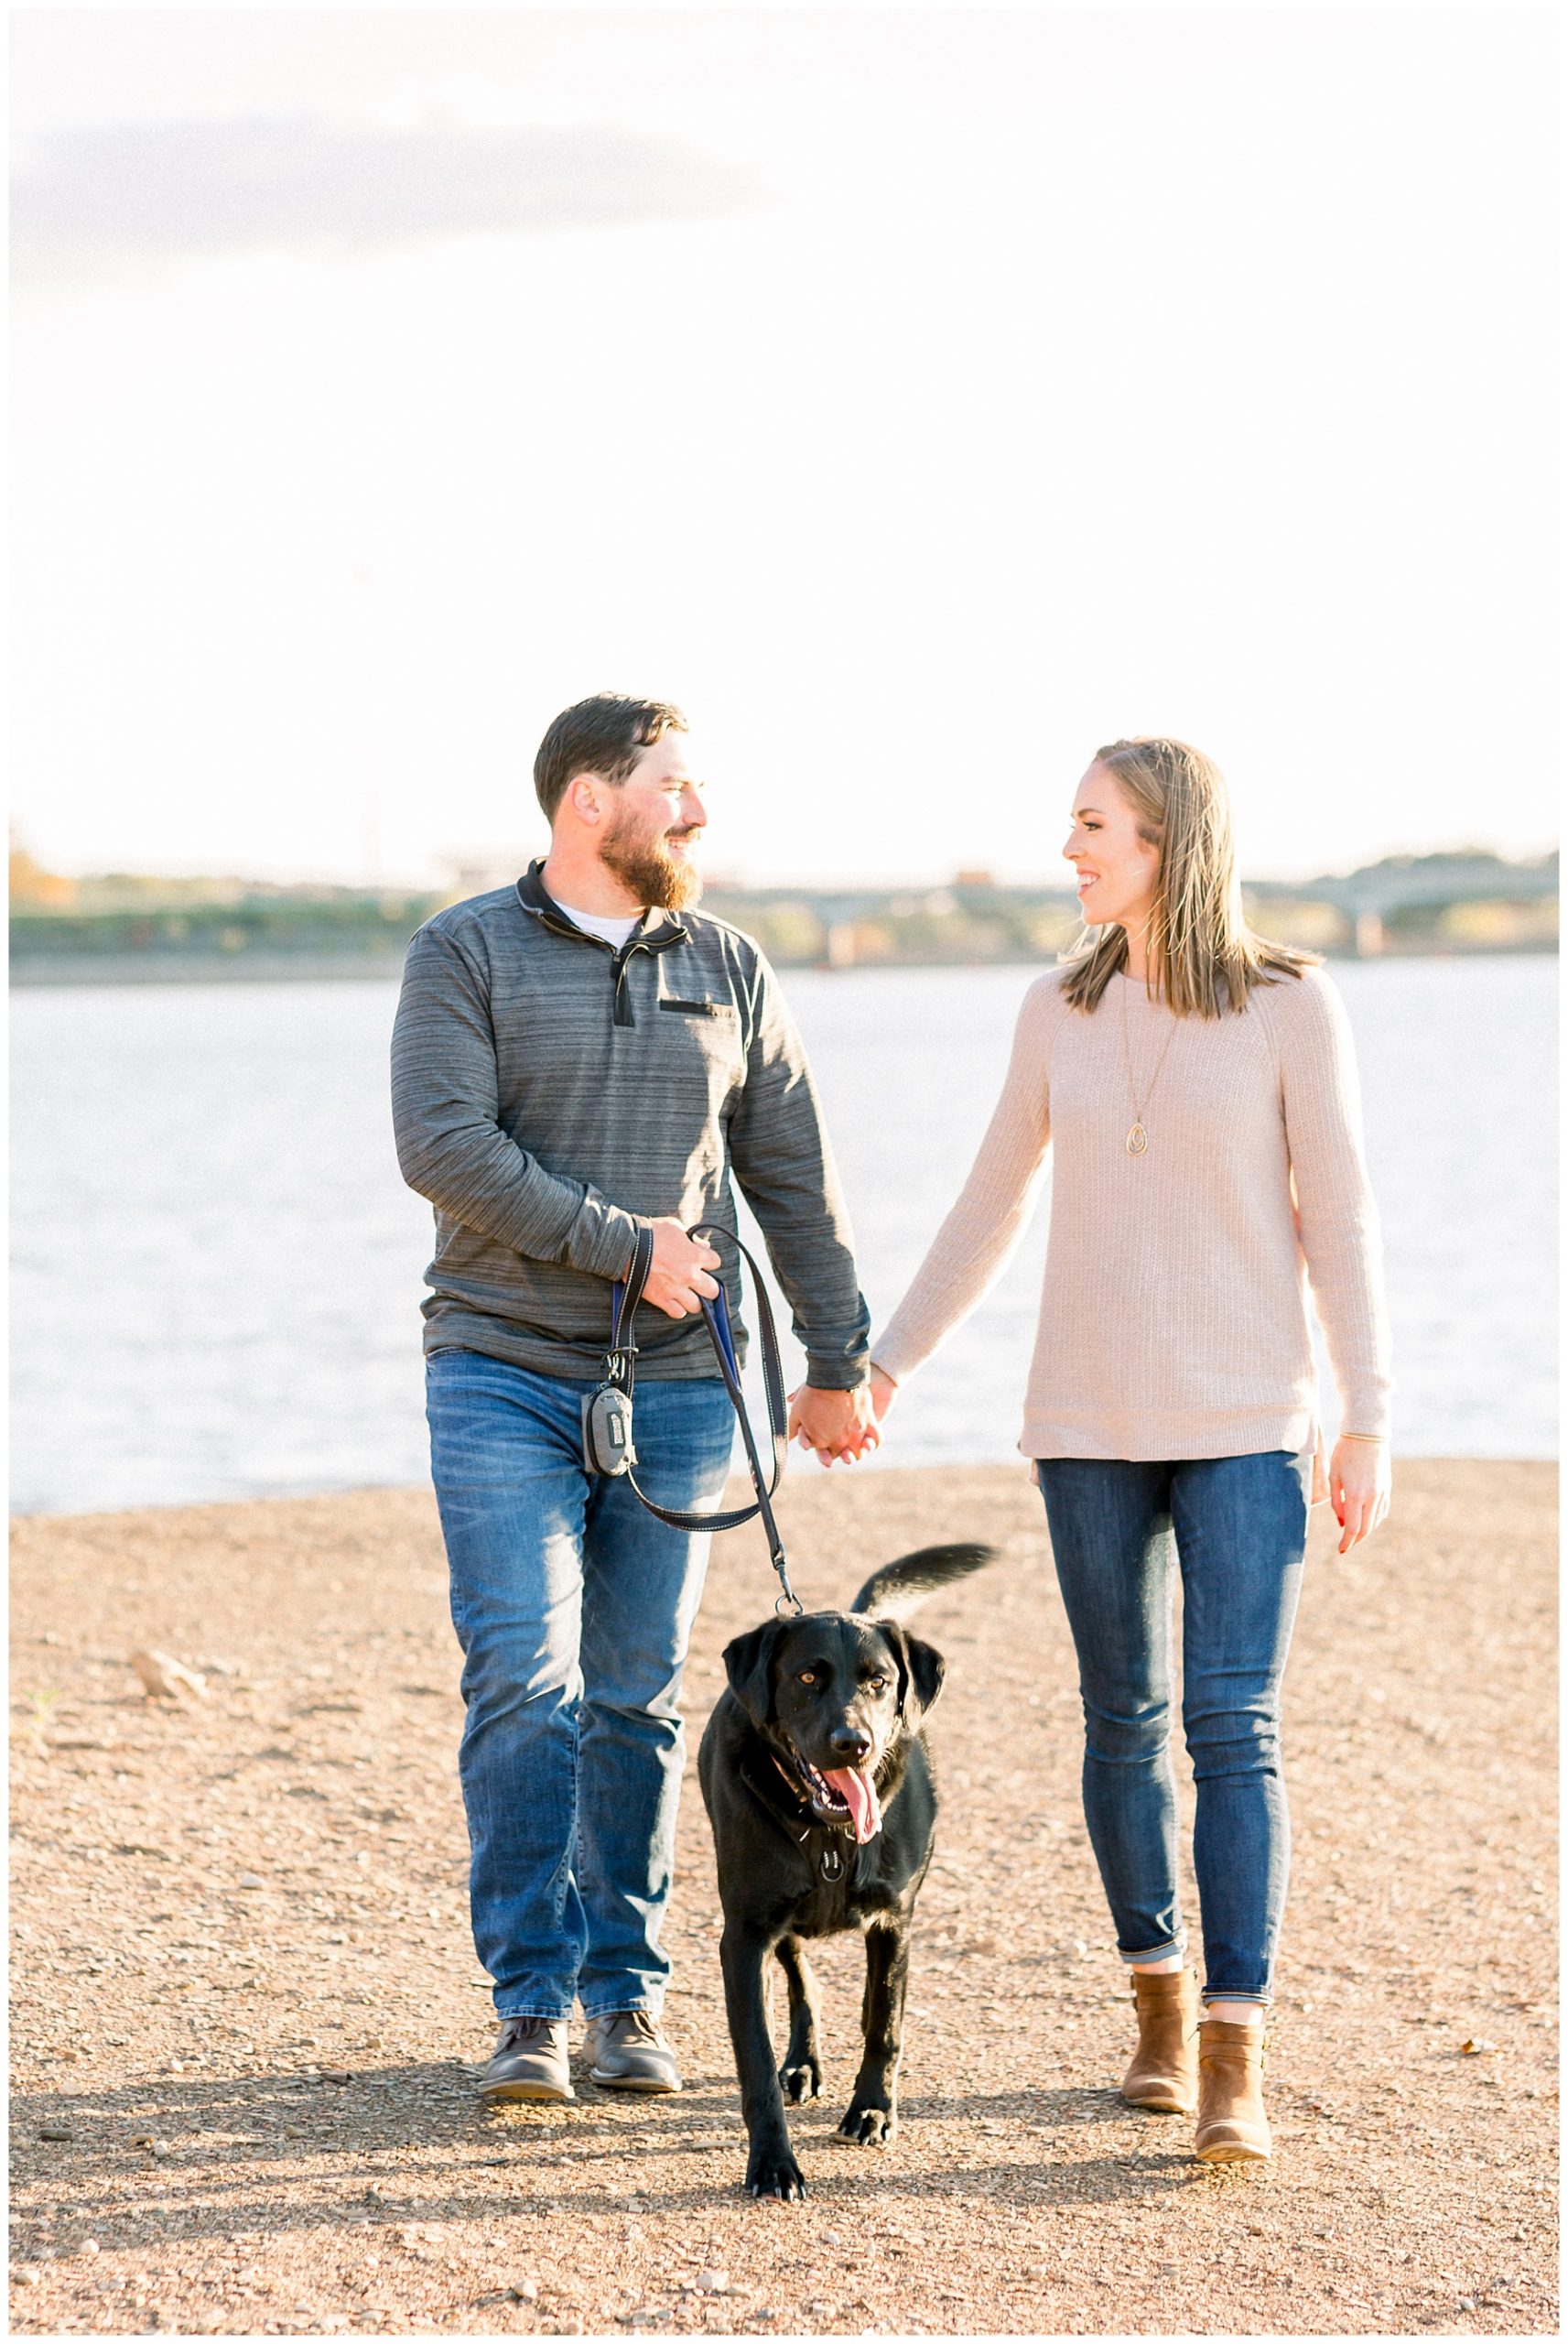 Hoover Reservoir Park Engagement Session with dog in Columbus Ohio